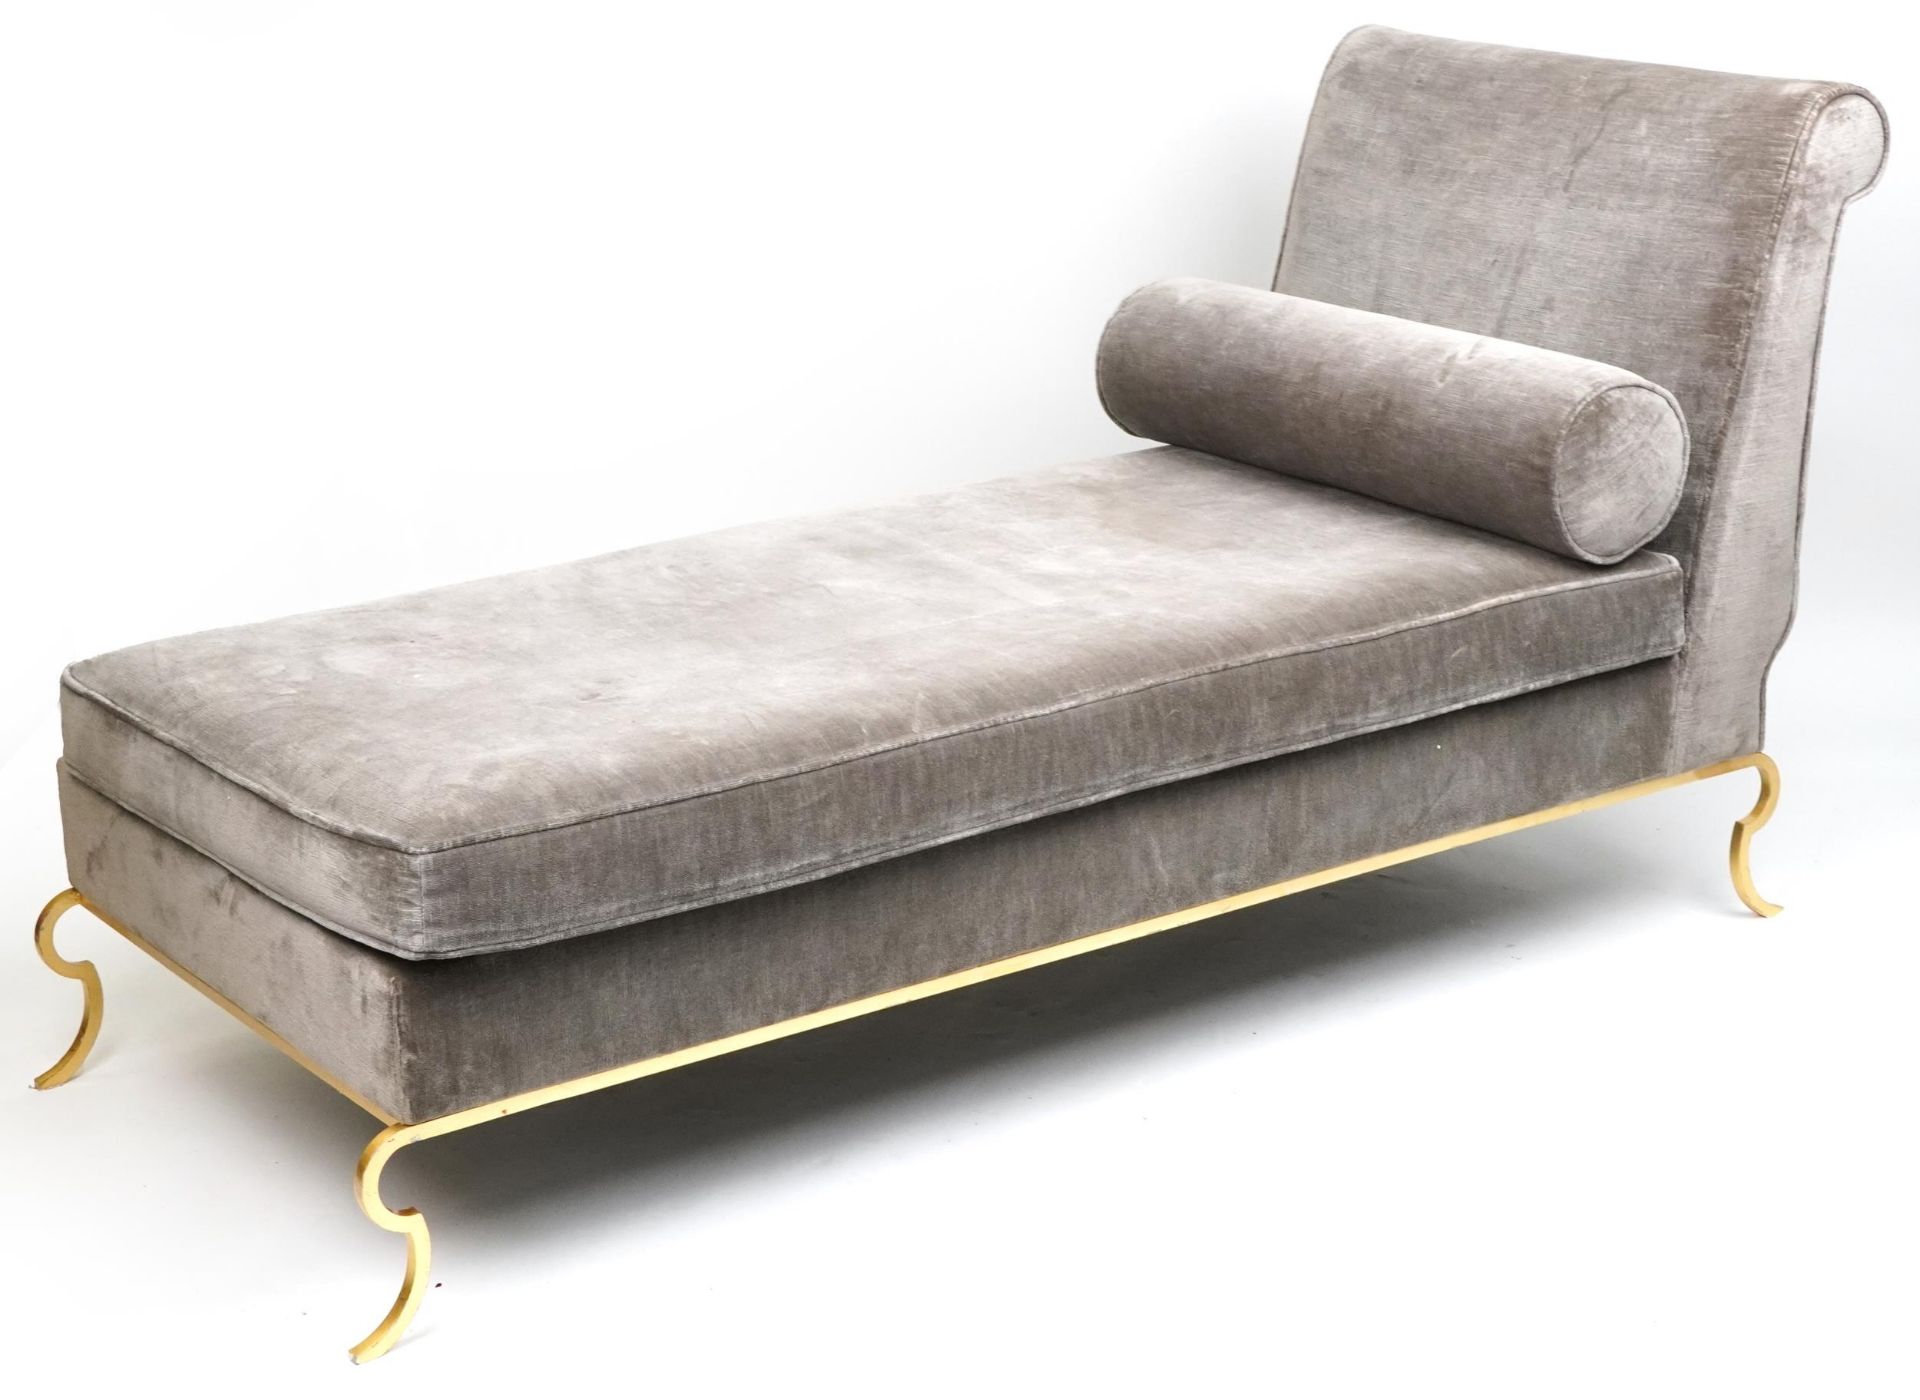 Contemporary grey upholstered chaise longue with gilt metal frame, 91cm H x 175cm W x 77cm D